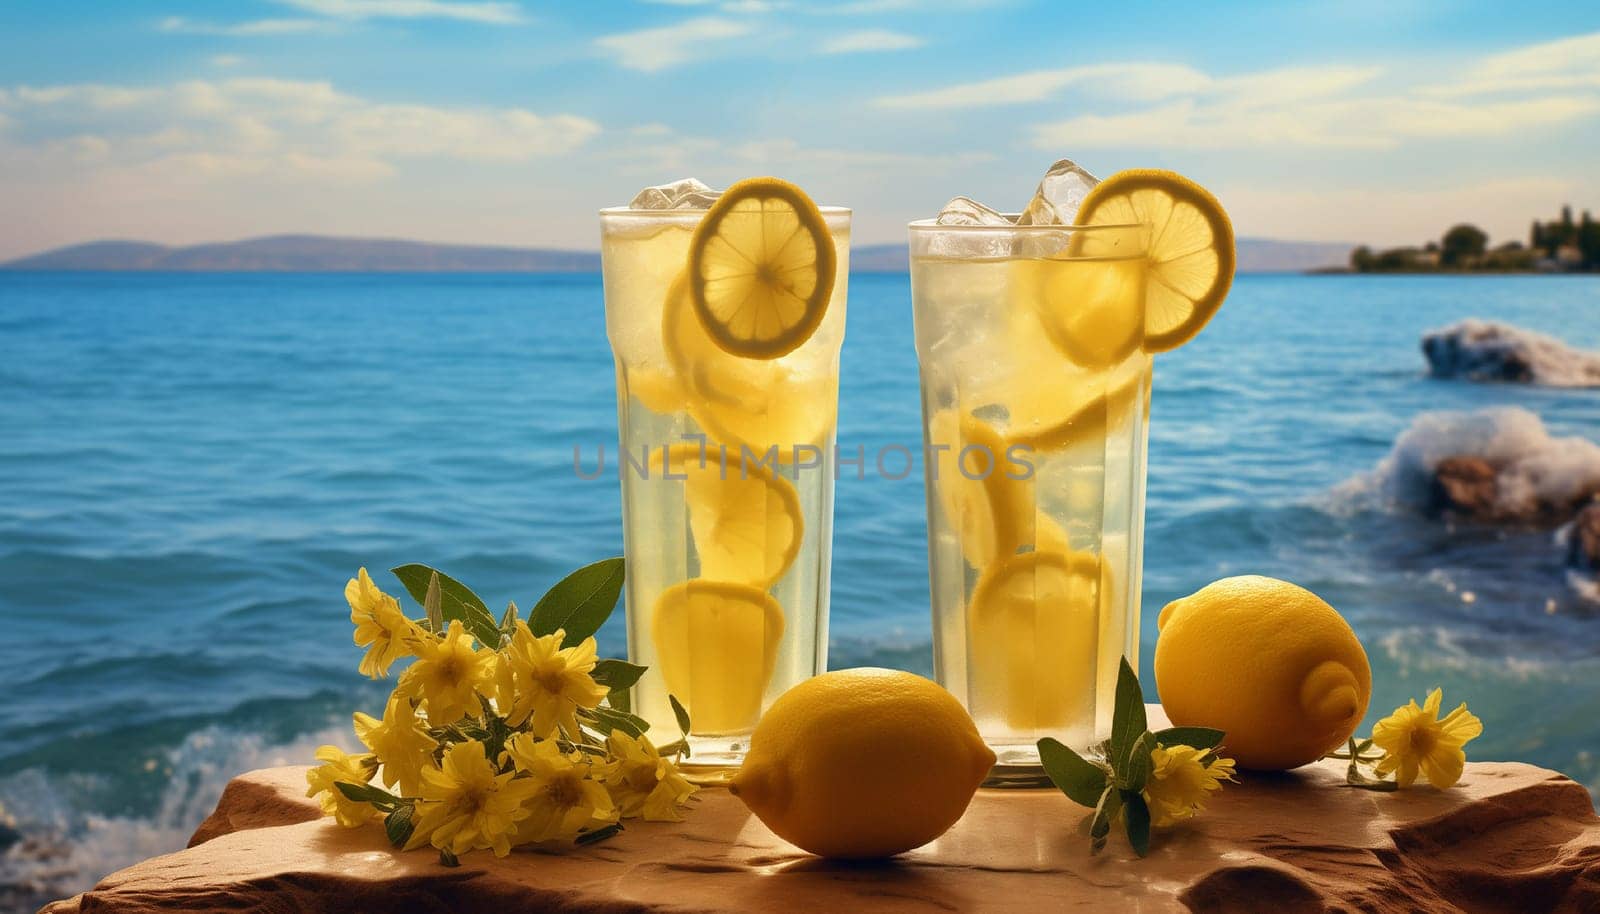 Two glasses of lemonade against the backdrop of the sea and in sunny weather. High quality photo